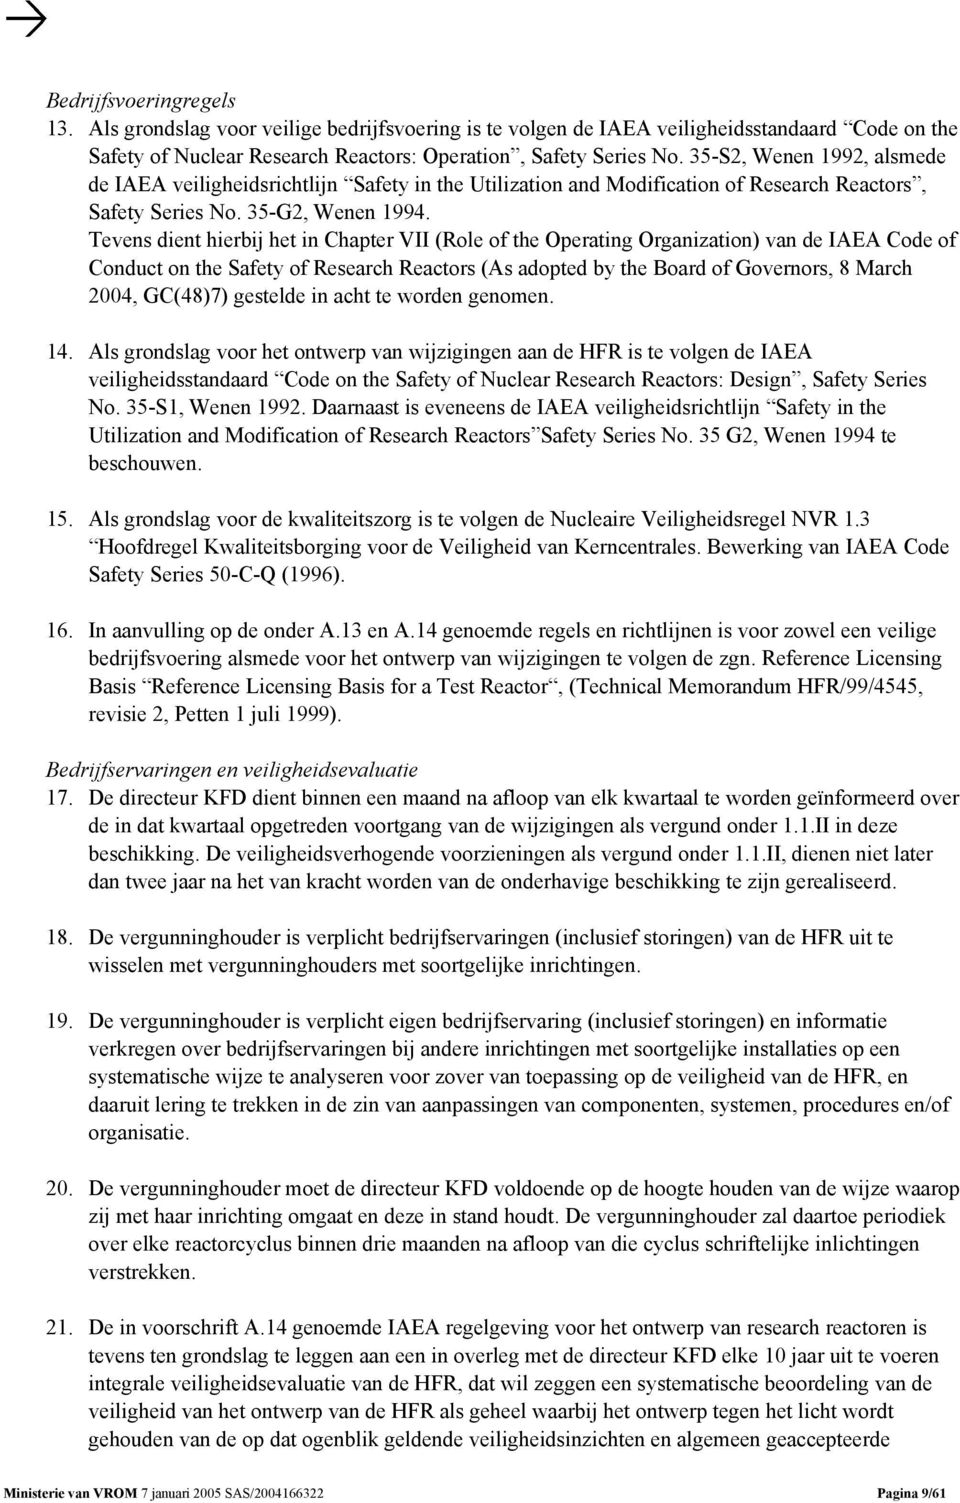 Tevens dient hierbij het in Chapter VII (Role of the Operating Organization) van de IAEA Code of Conduct on the Safety of Research Reactors (As adopted by the Board of Governors, 8 March 2004,